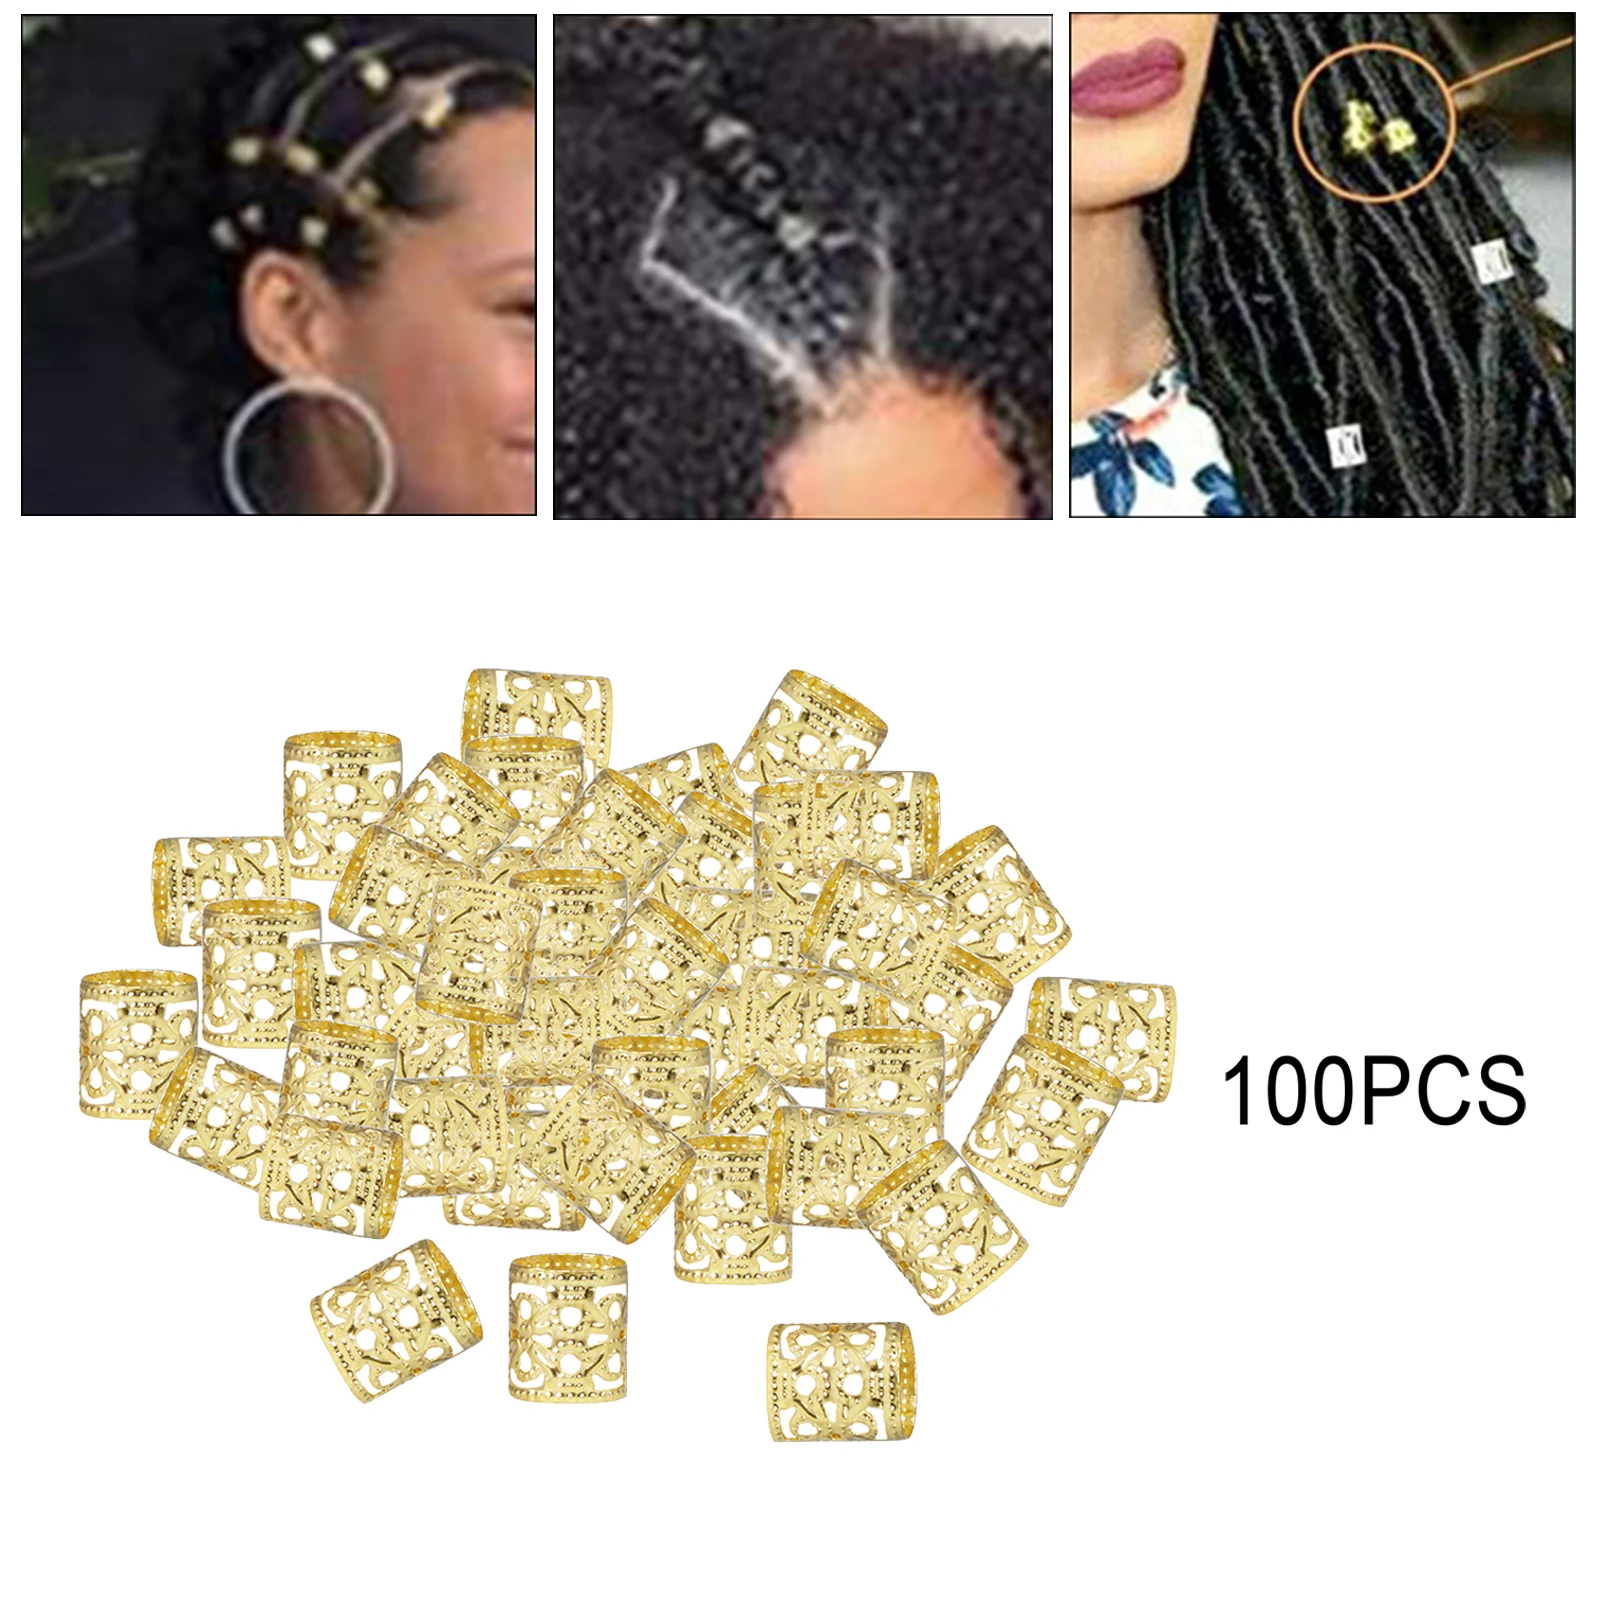 100 Pcs Dirty Hair Extension Buckles Adjustable Beads Hair Jewelry Decoration Clips for Women Girls